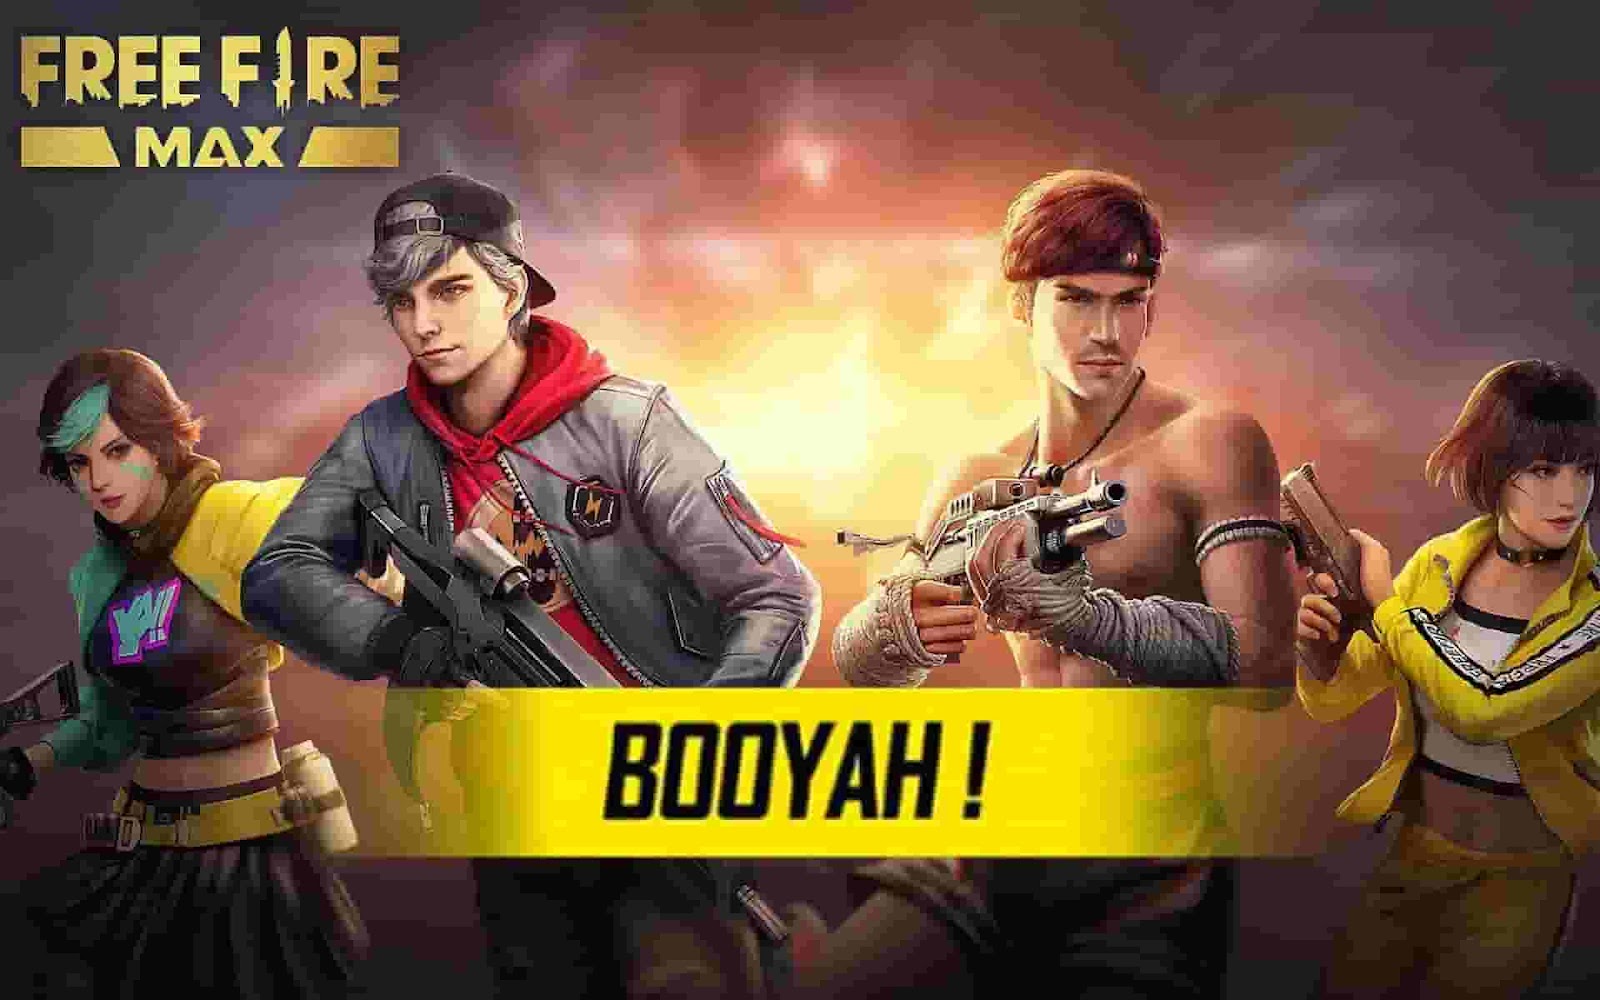 free fire max tips and tricks, tips to get heroic rank in free fire max, tips to get heroic rank or above in free fire max, free fire max characters, tips for rank pushing in free fire max, tips to reach grandmaster in free fire max.5 Tips to Reach Heroic Rank in Free Fire MAX. 